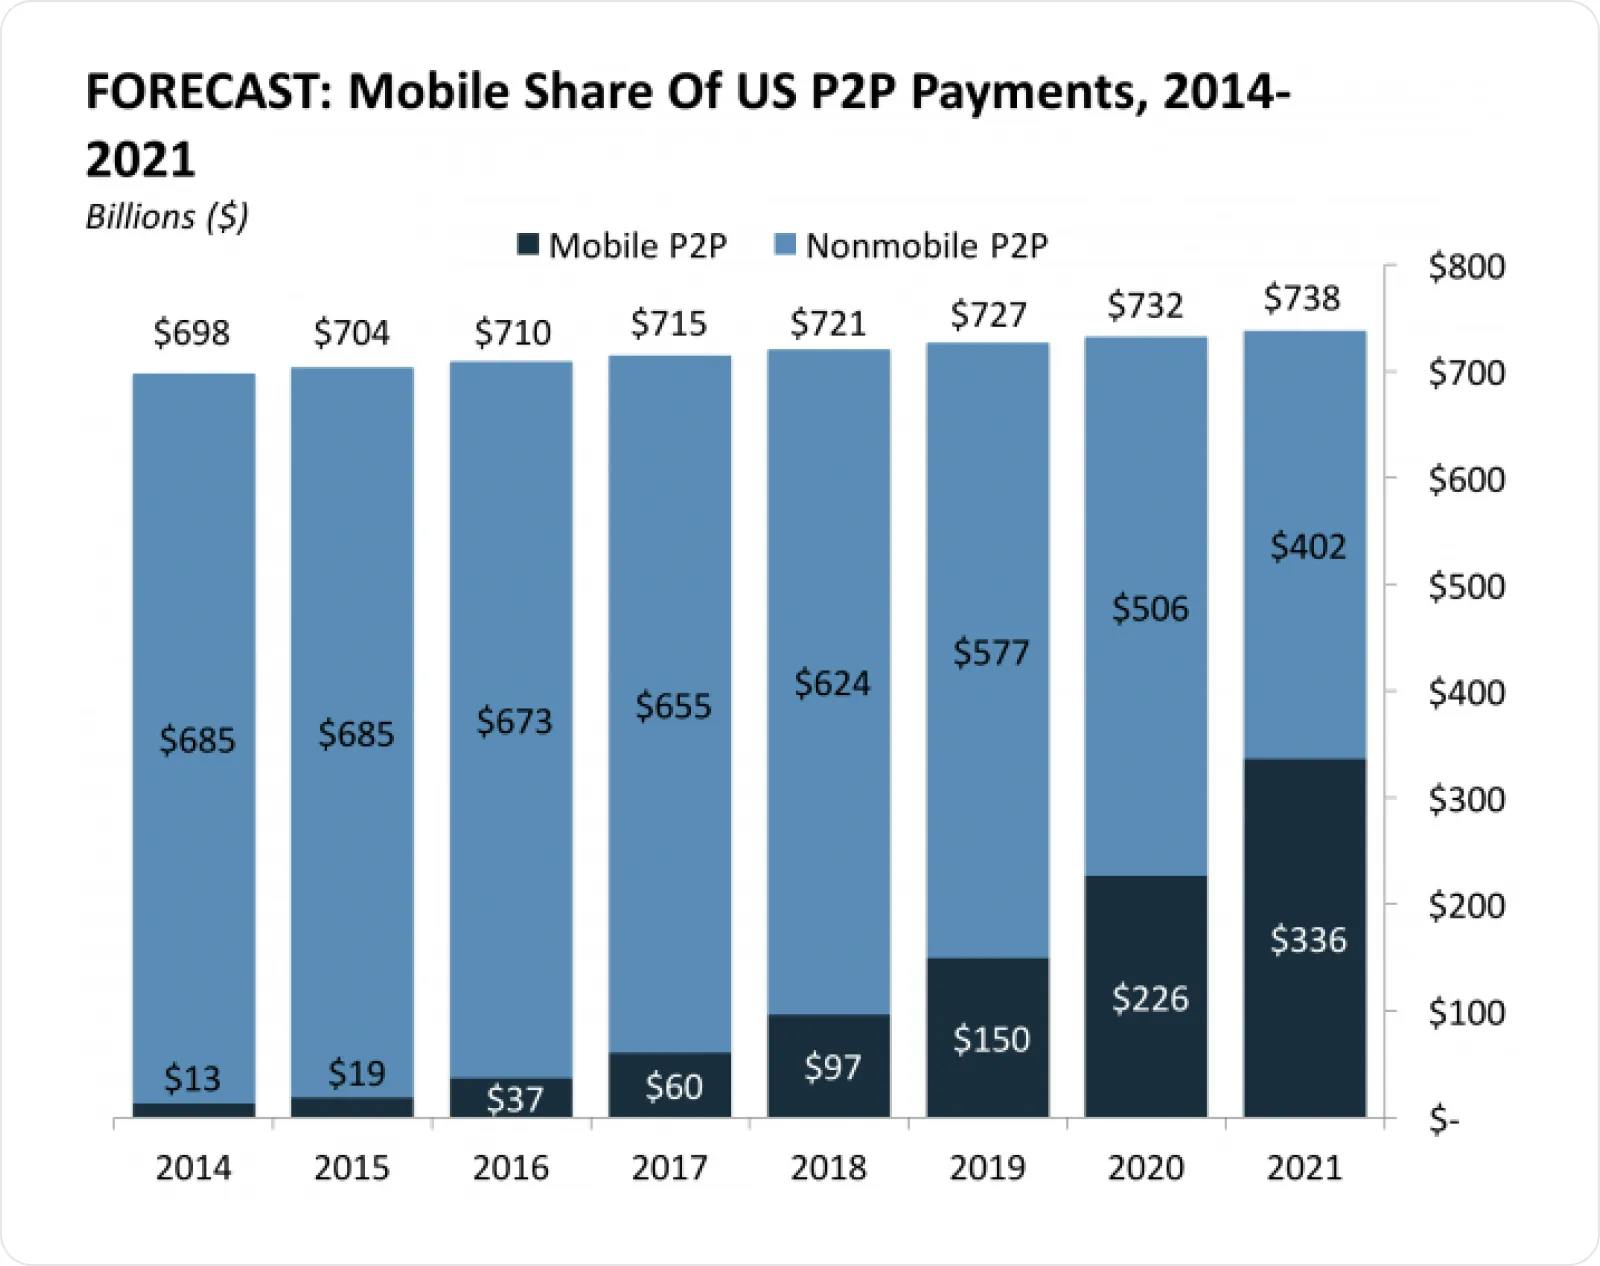 Forecast: Mobile share of us p2p payments 2014-2021